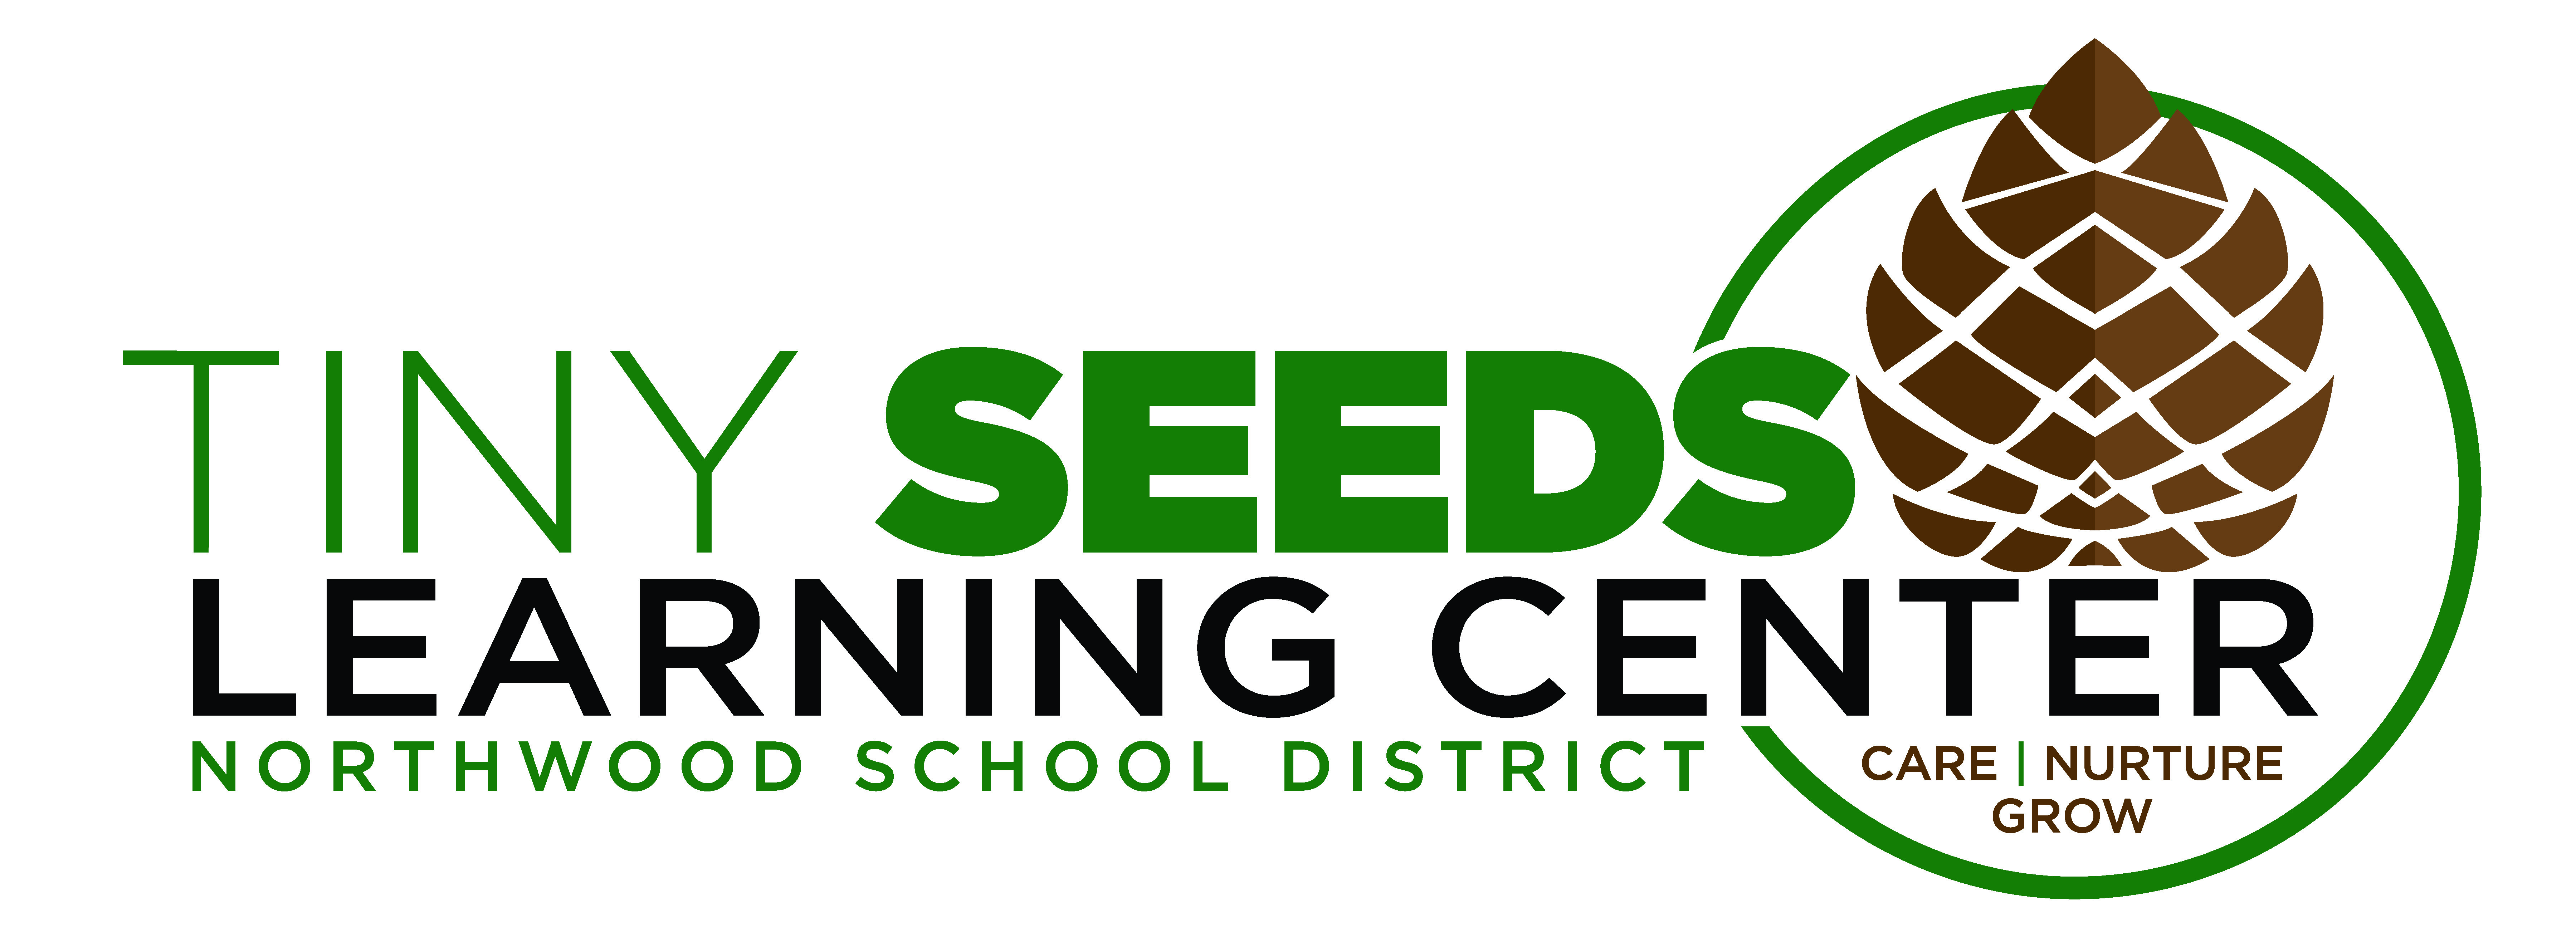 Tiny Seeds Learning Center